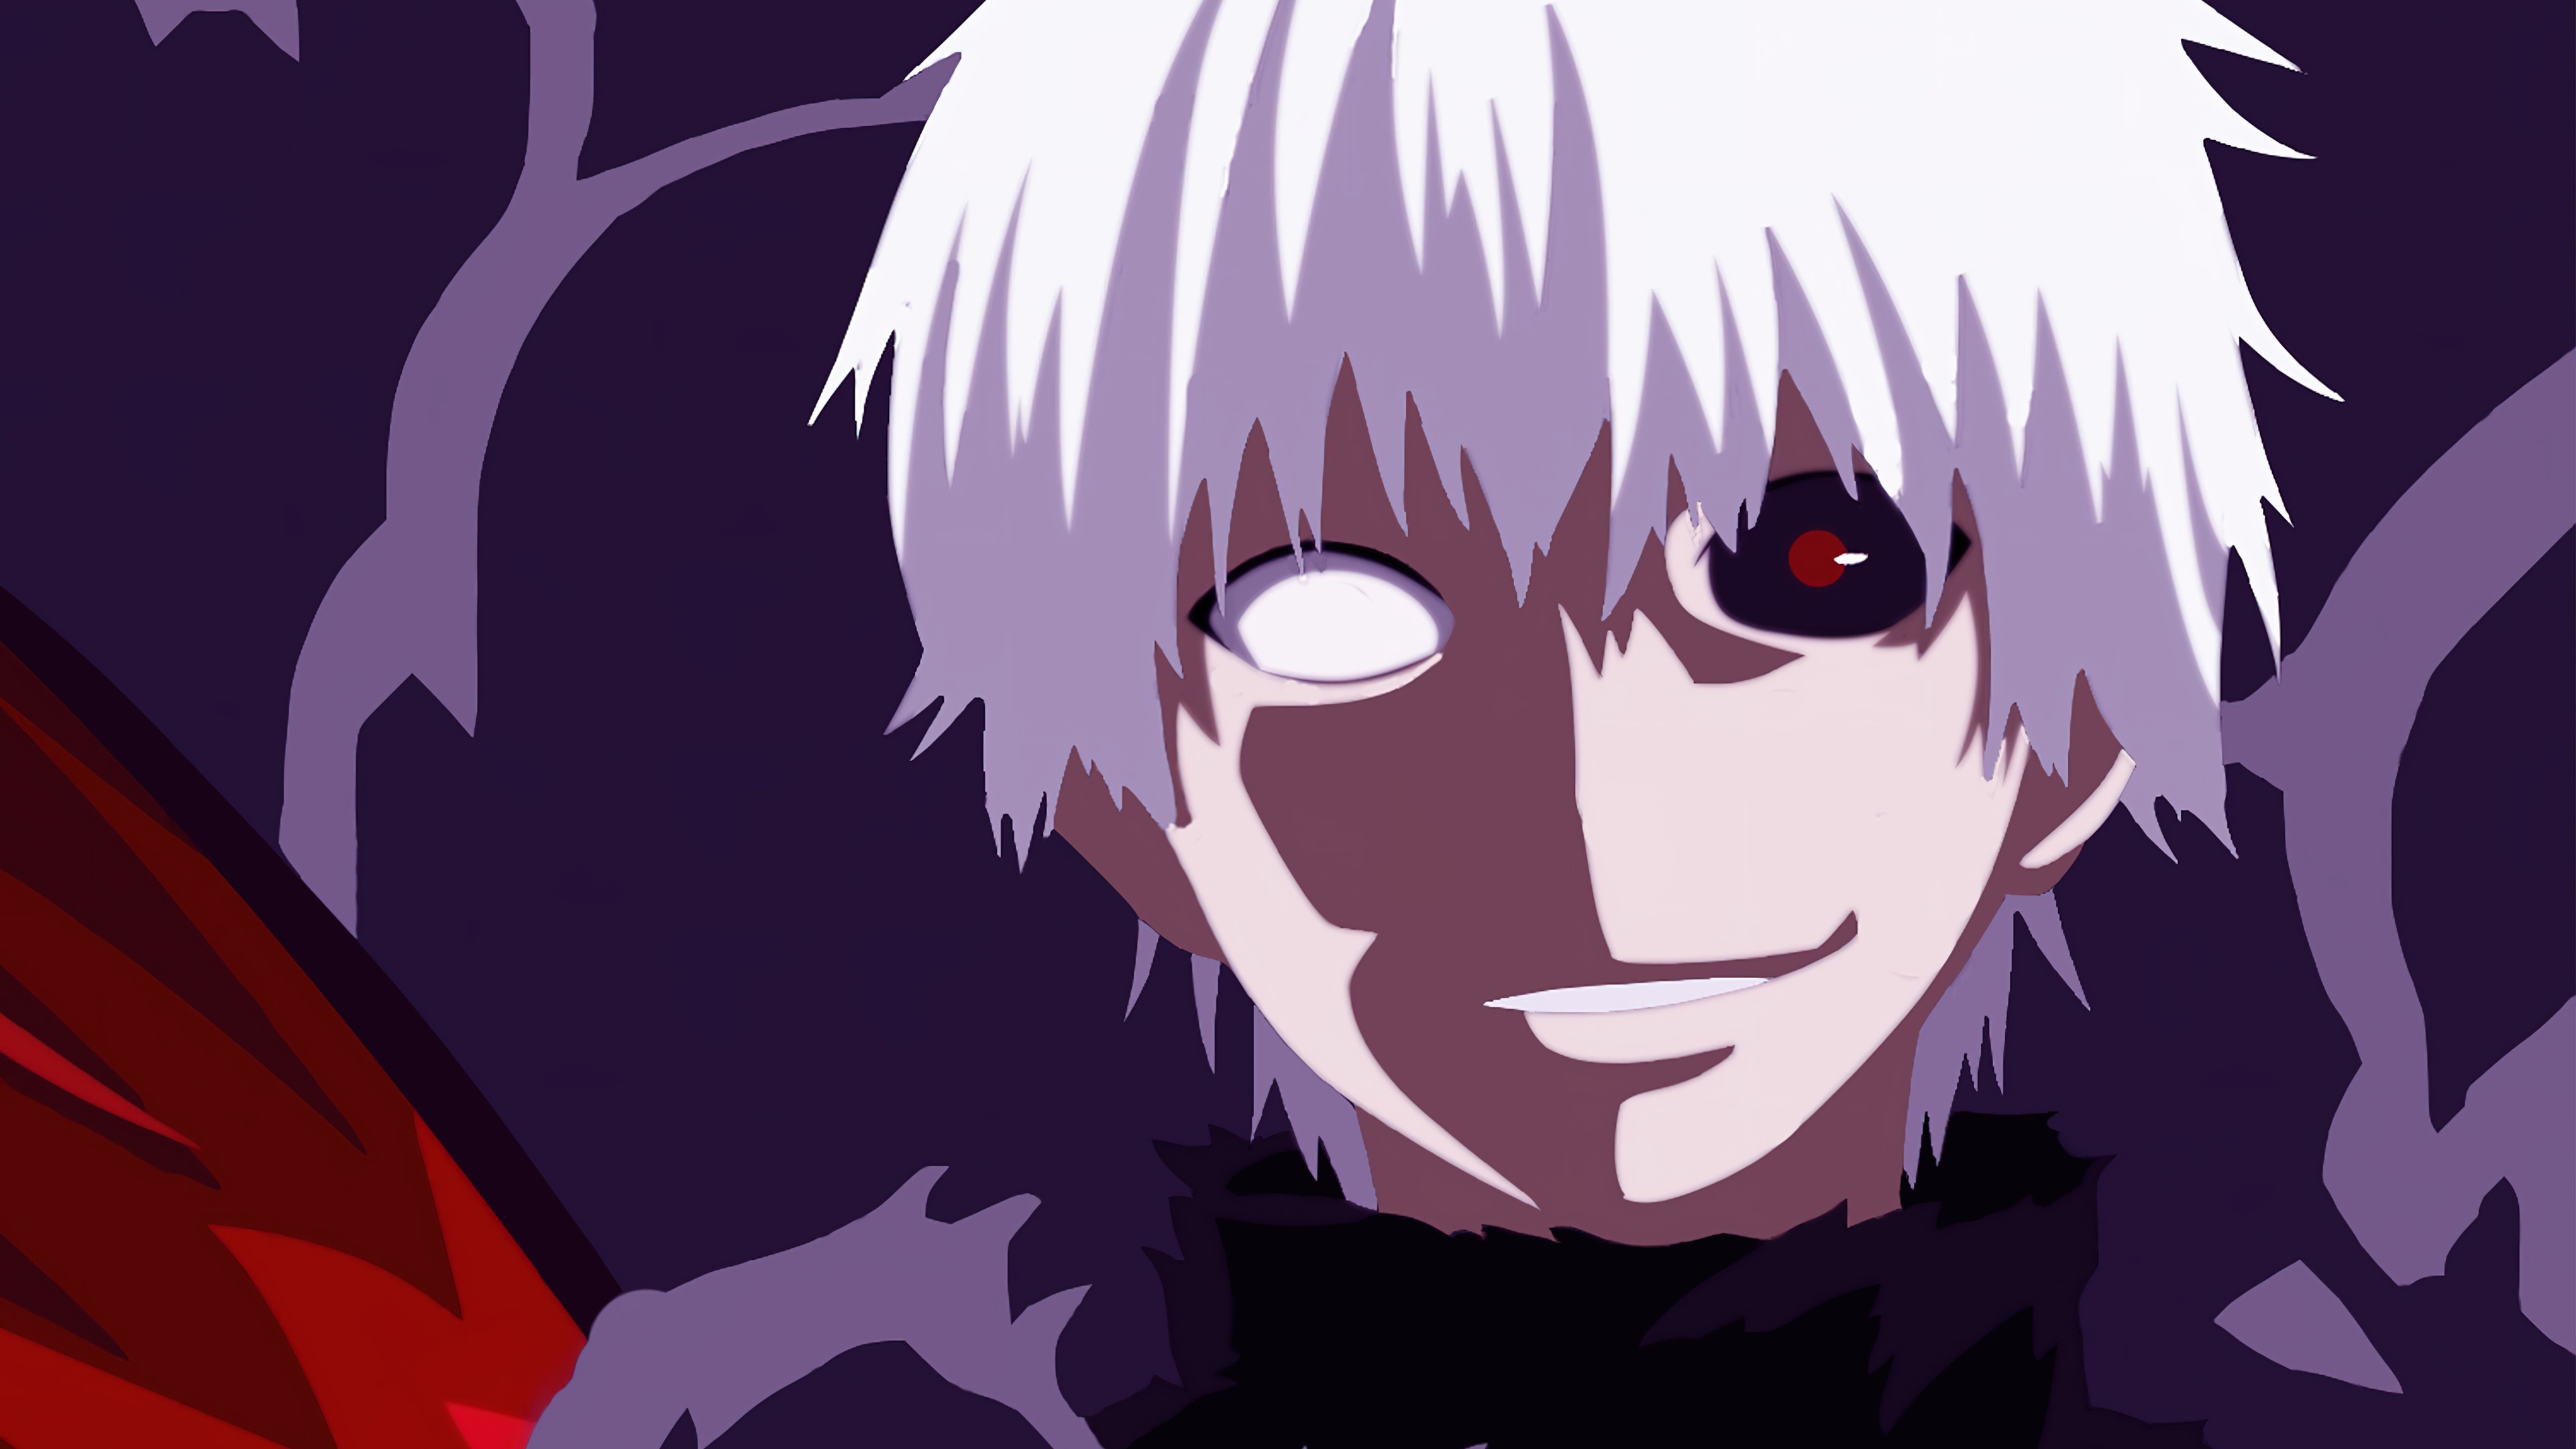 Characters from Tokyo Ghoul Anime Wallpaper ID4557